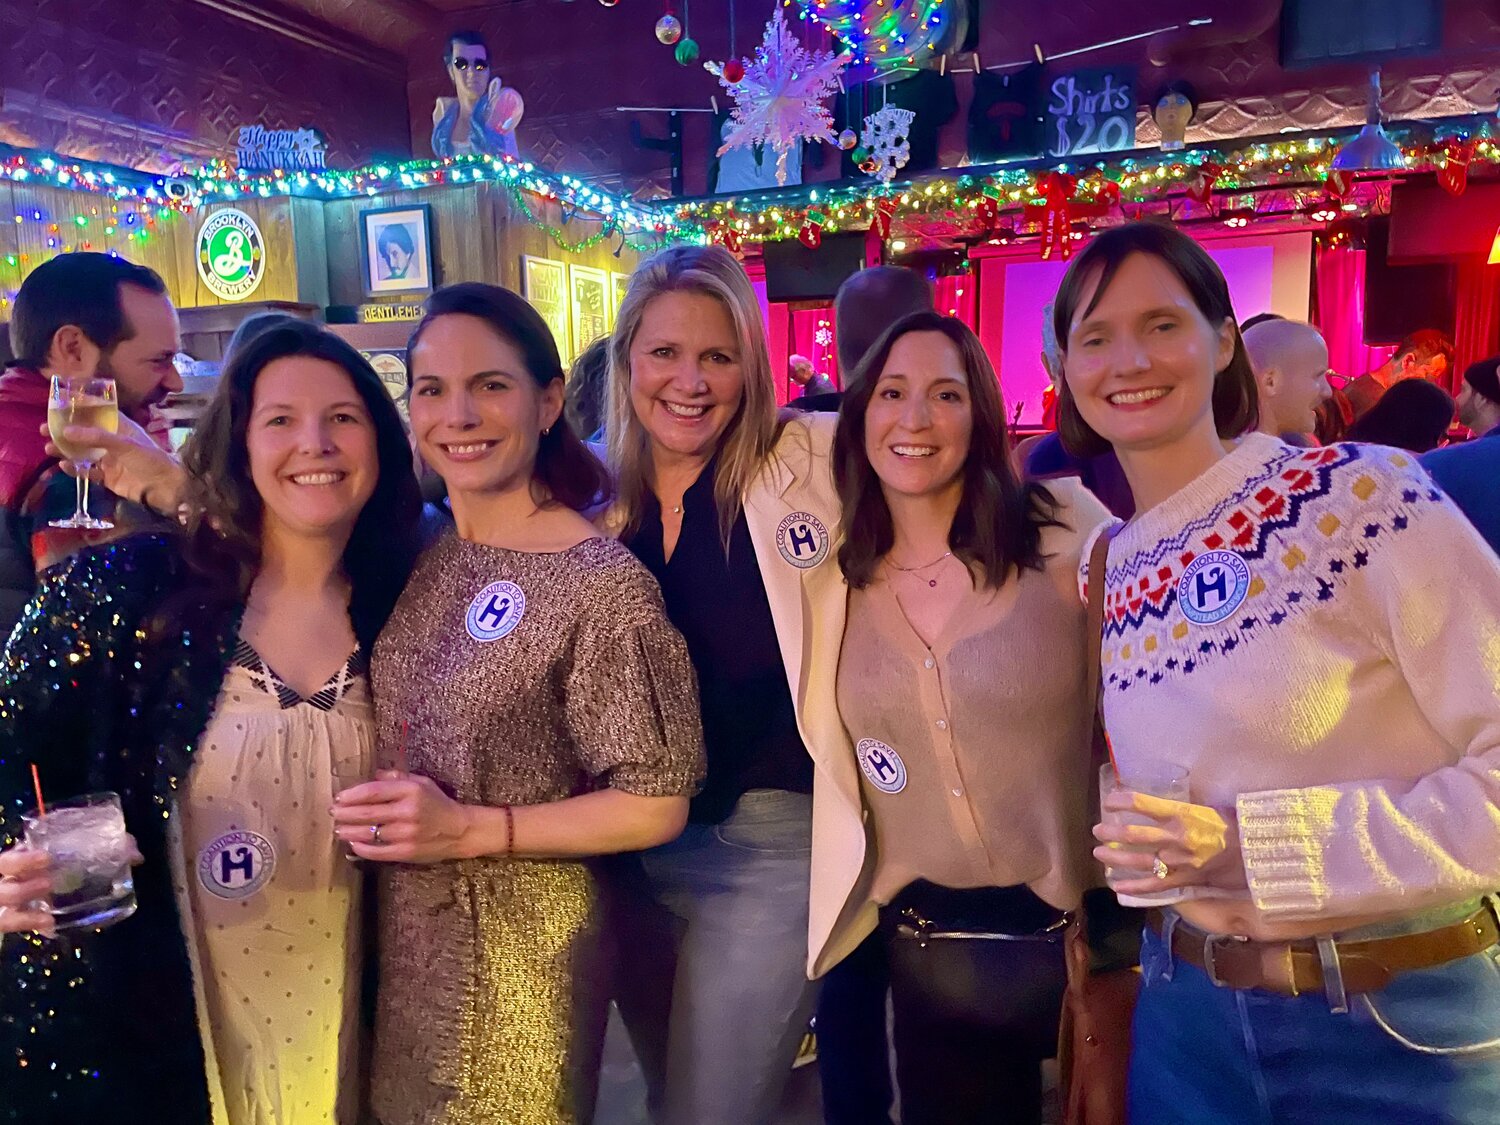 Kristie Leigh, left, Christina Carpenter, Kirsten Marchioli, Aimee Canzoniero and Michel Walkley were among the over 70 attendees at the event.